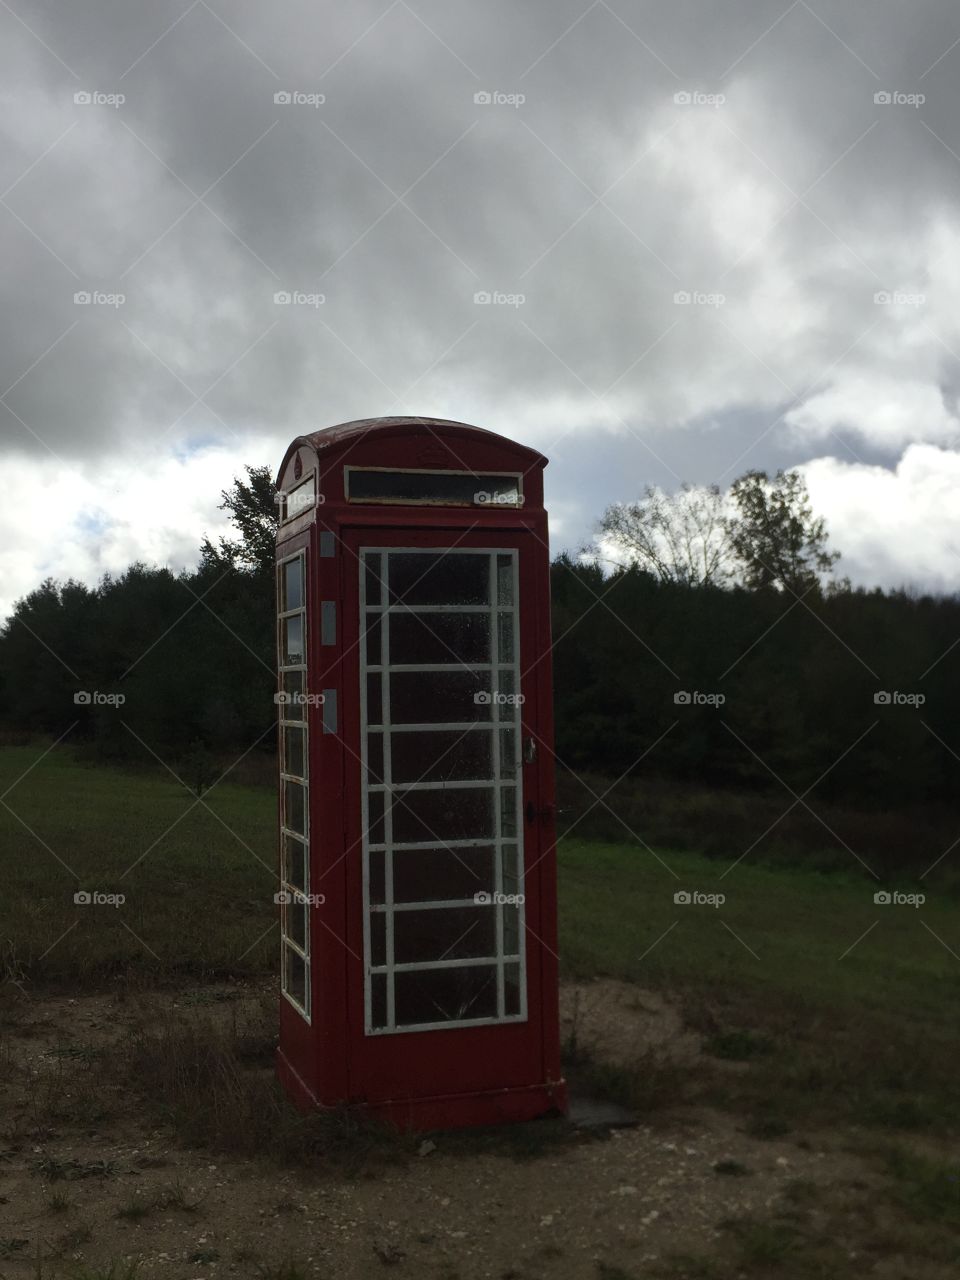 Old phone booth I believe from England used for children to stand in while waiting for school bus